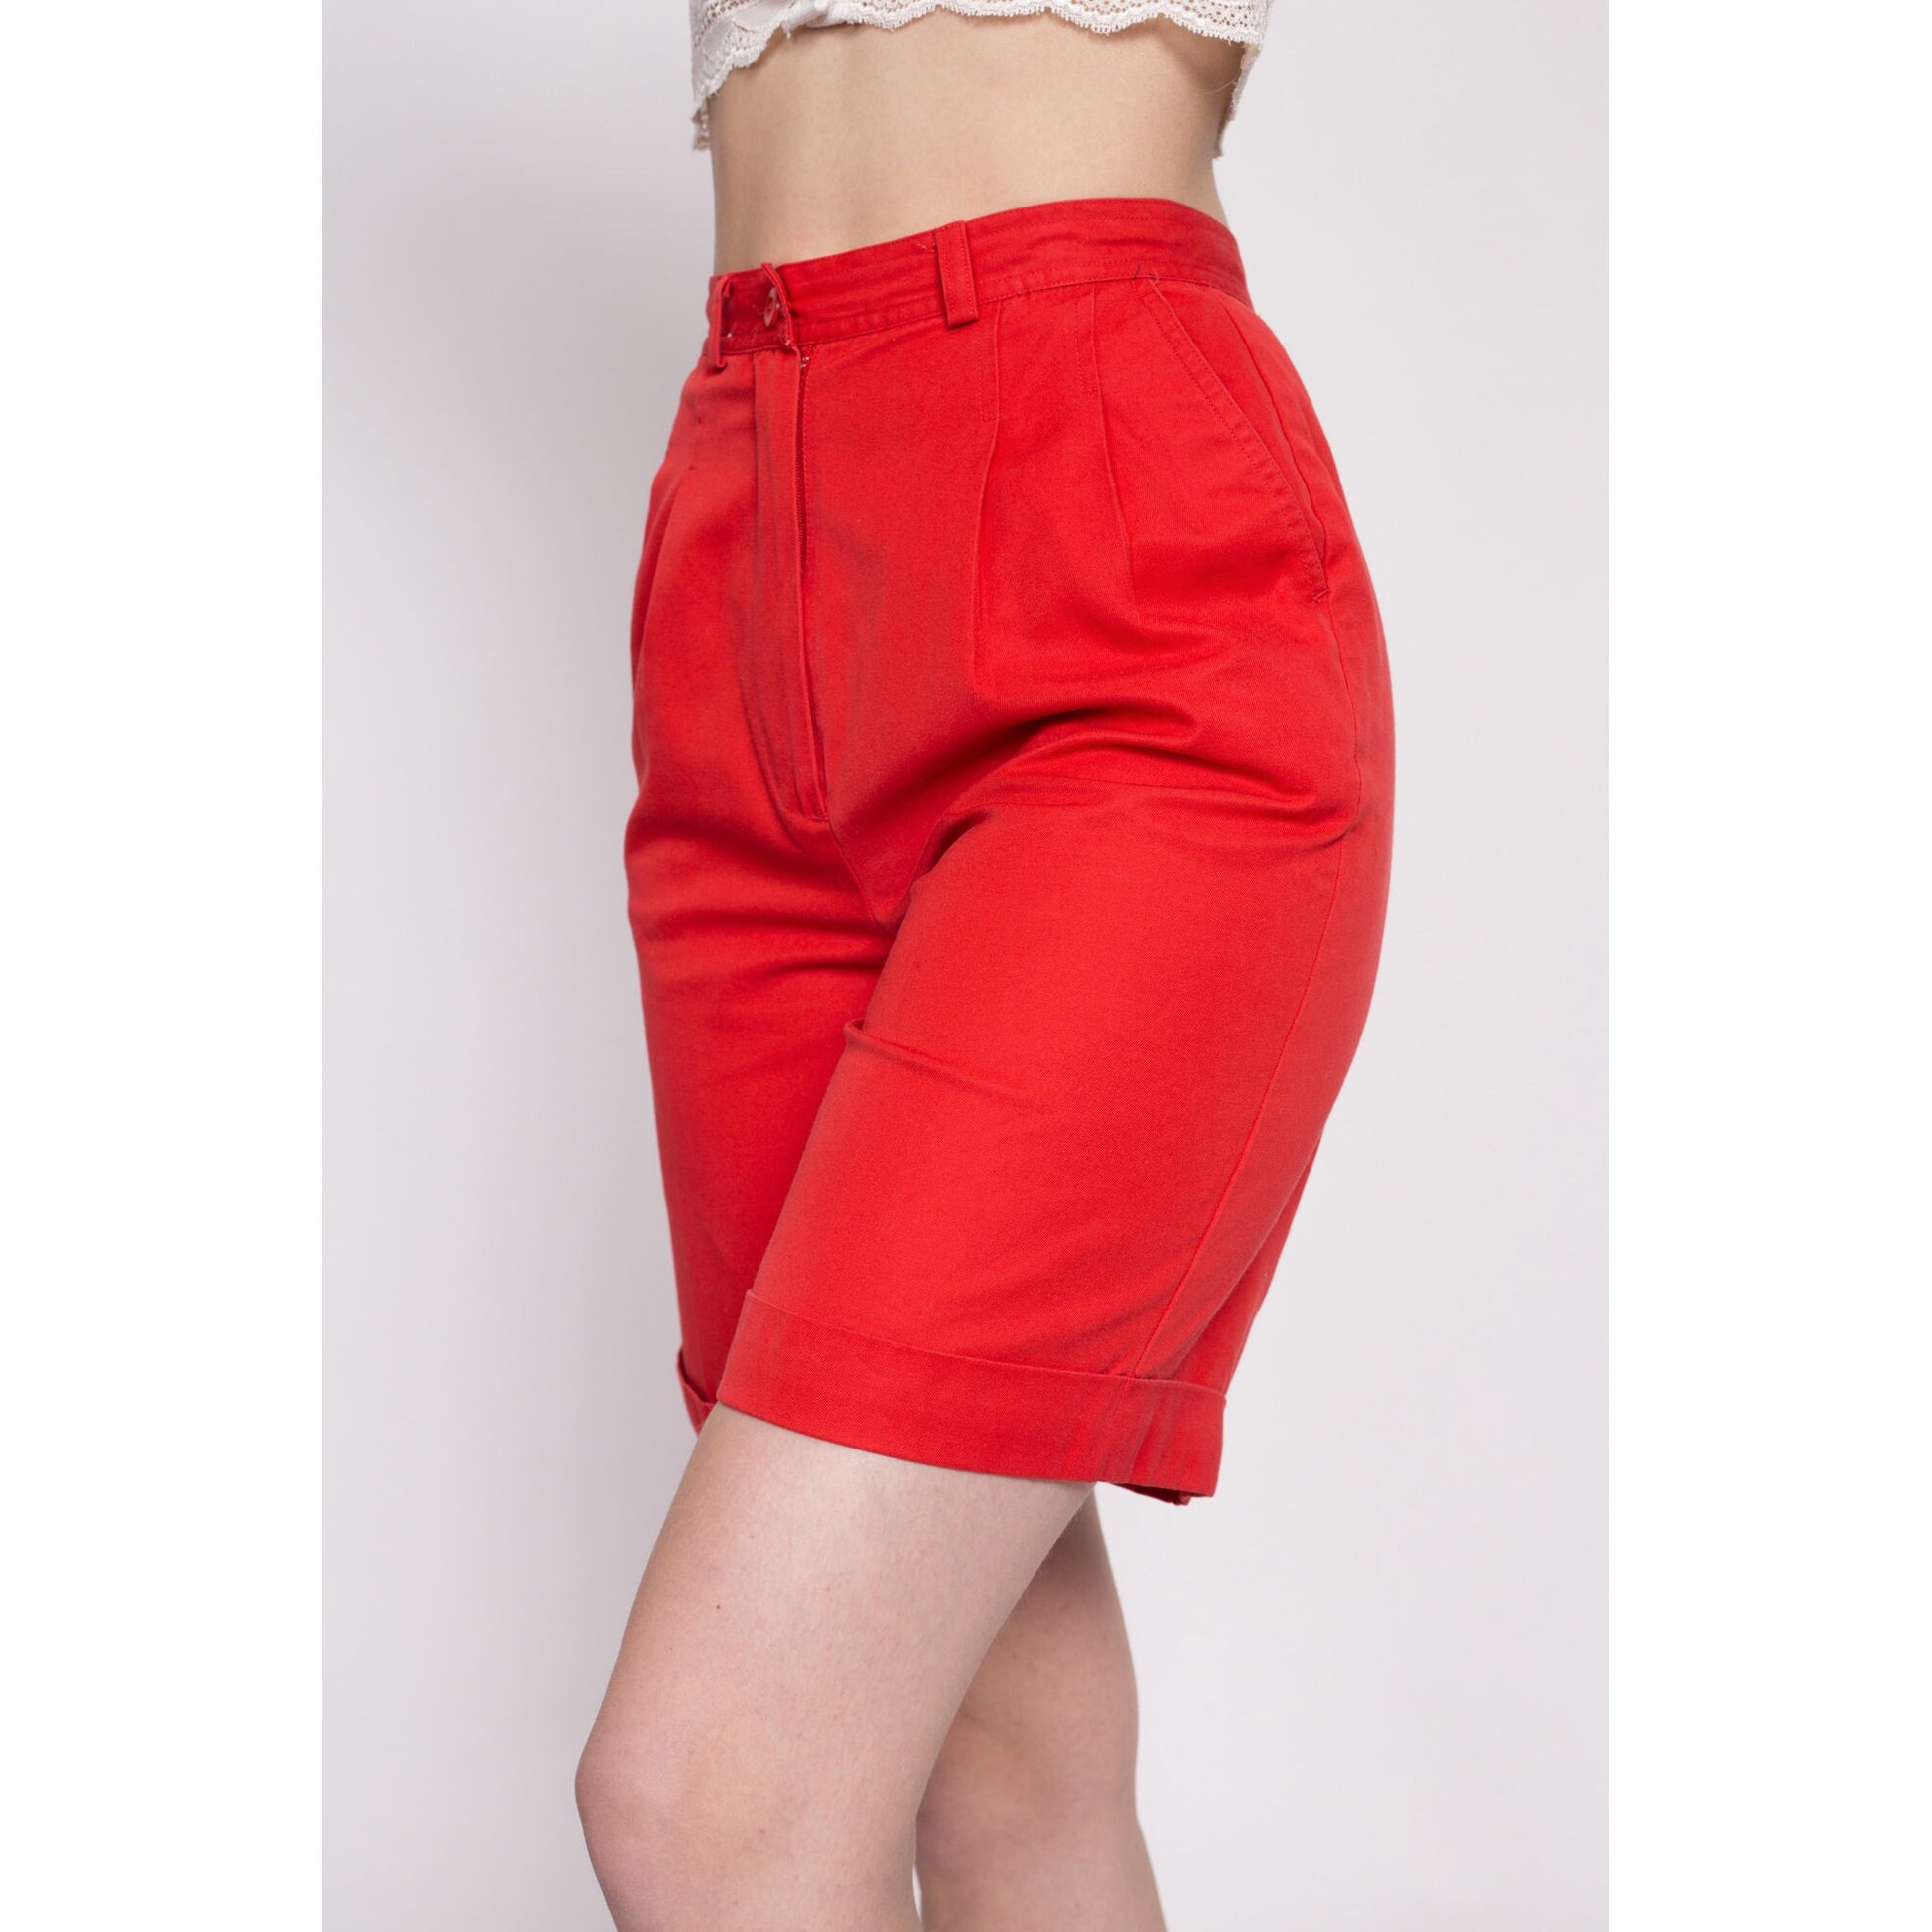 Cuffed Shorts for Women - Up to 80% off